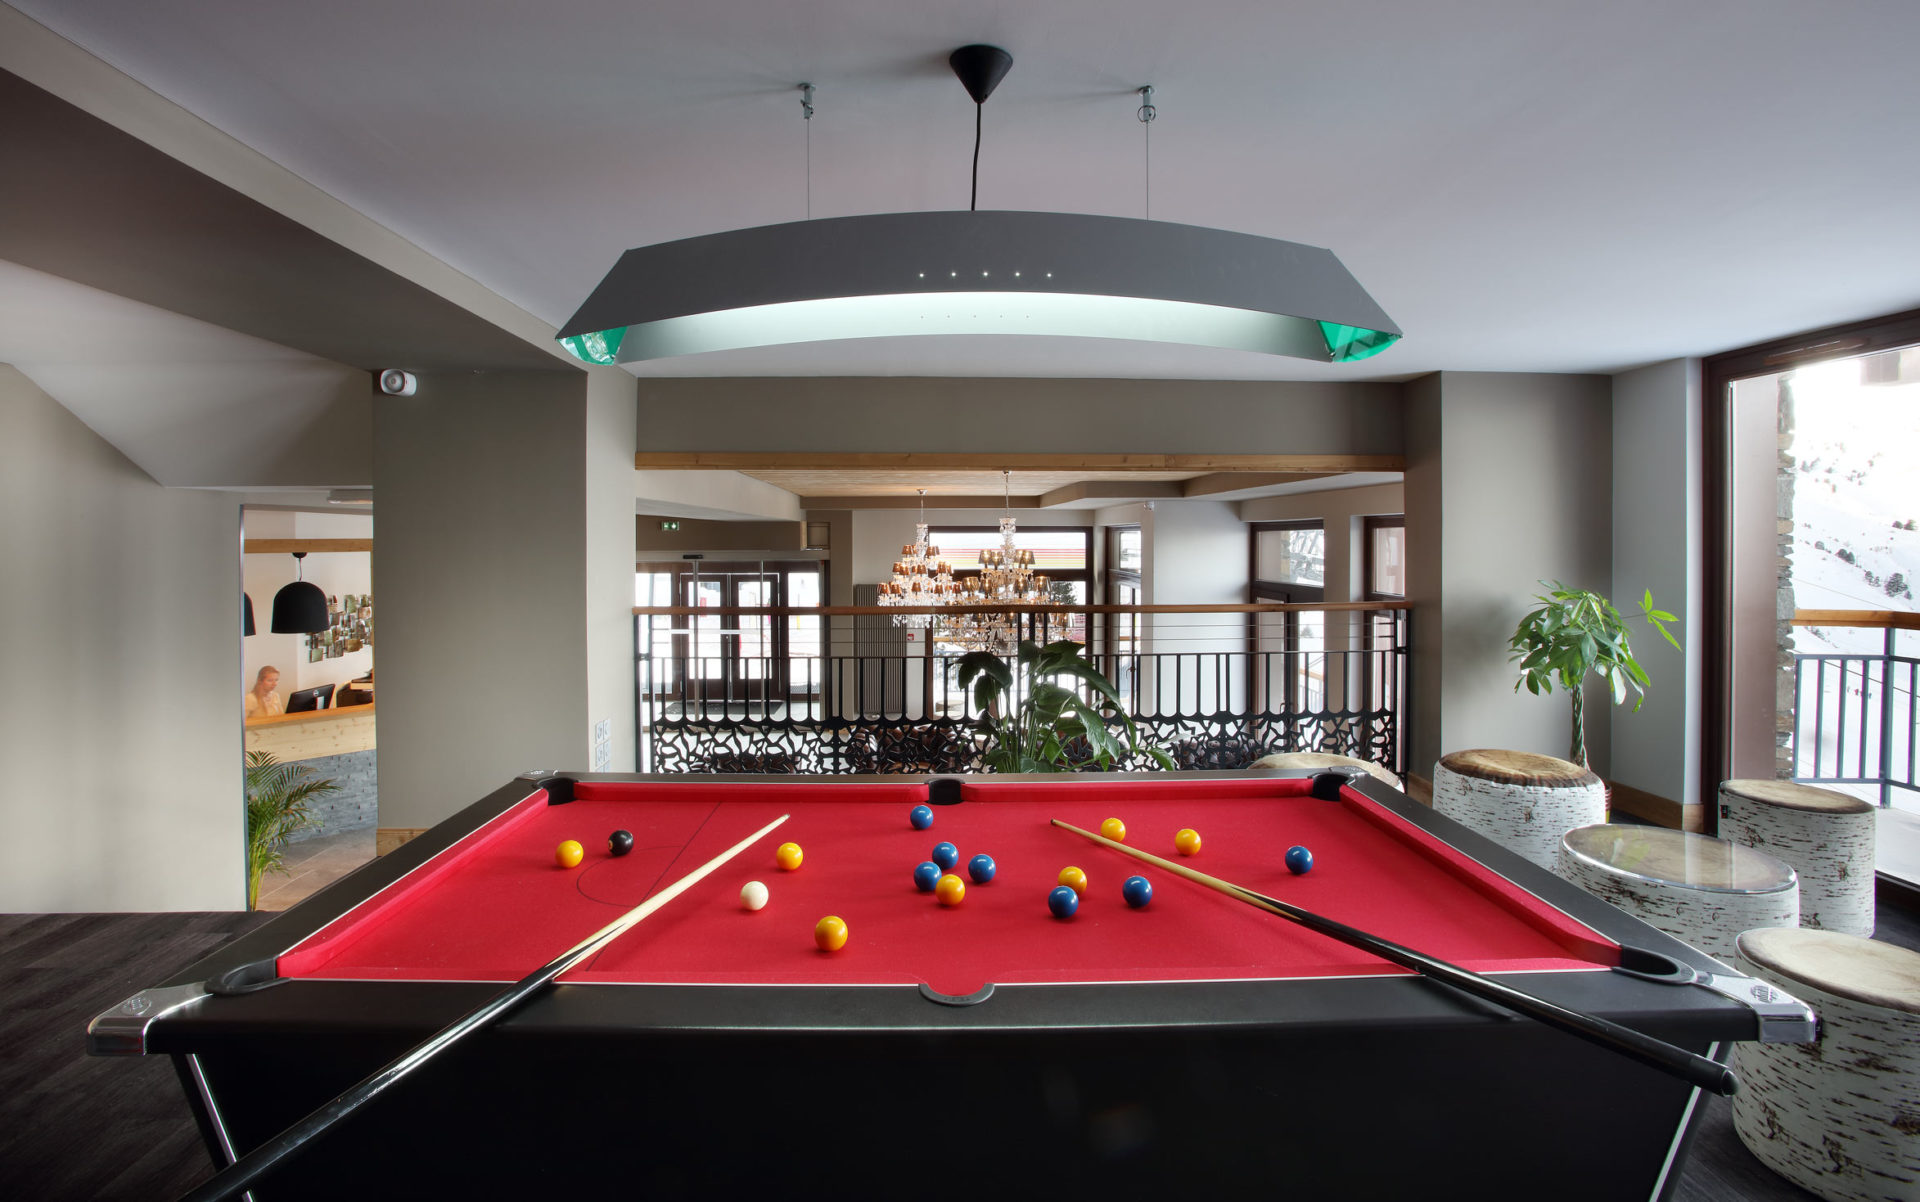 A photo of the pool table in the reception